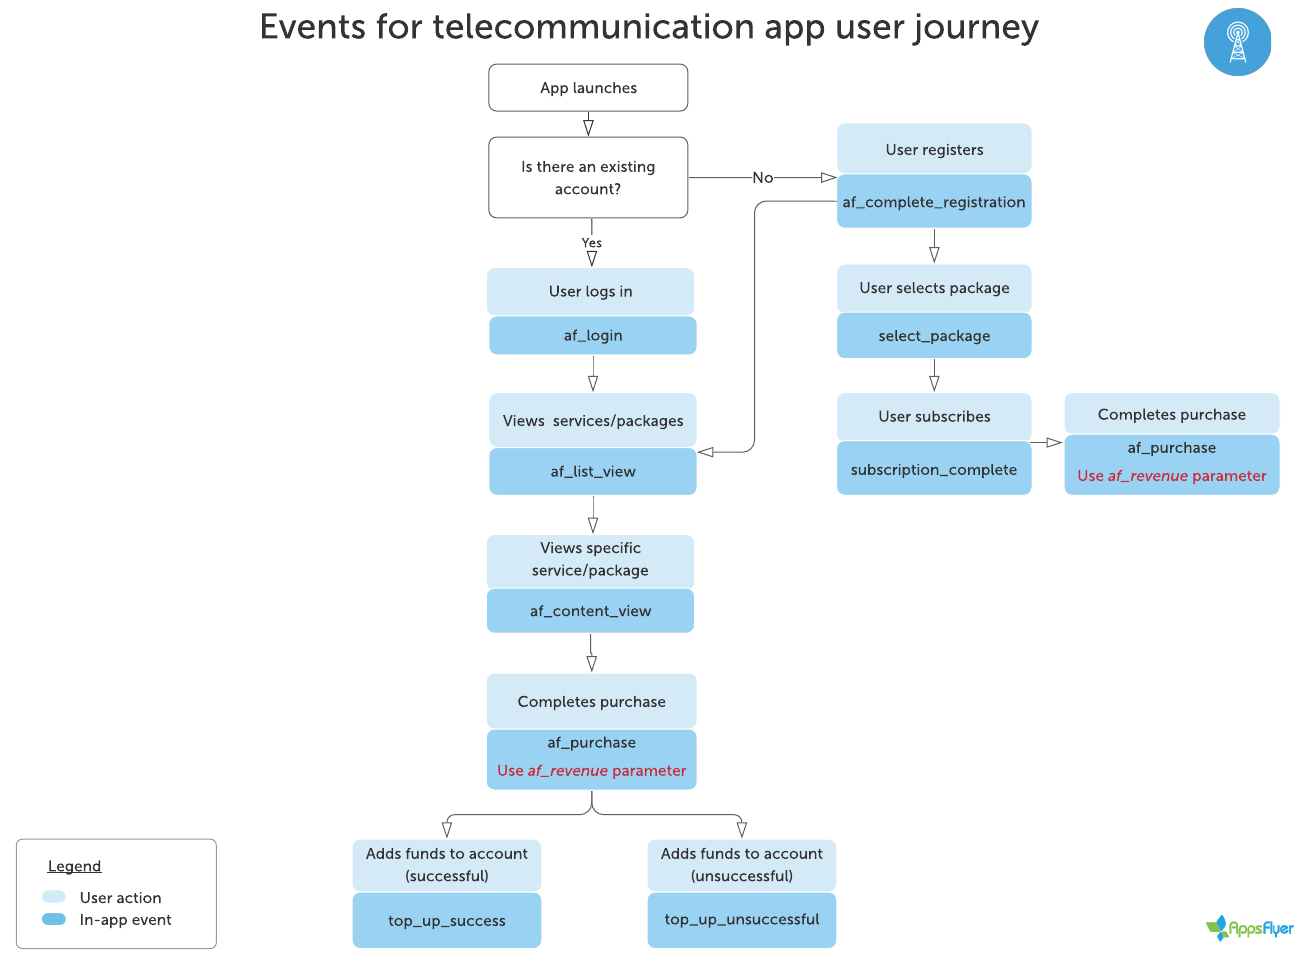 Flowchart_for_recommended_events_telecommunication_app_user_journey